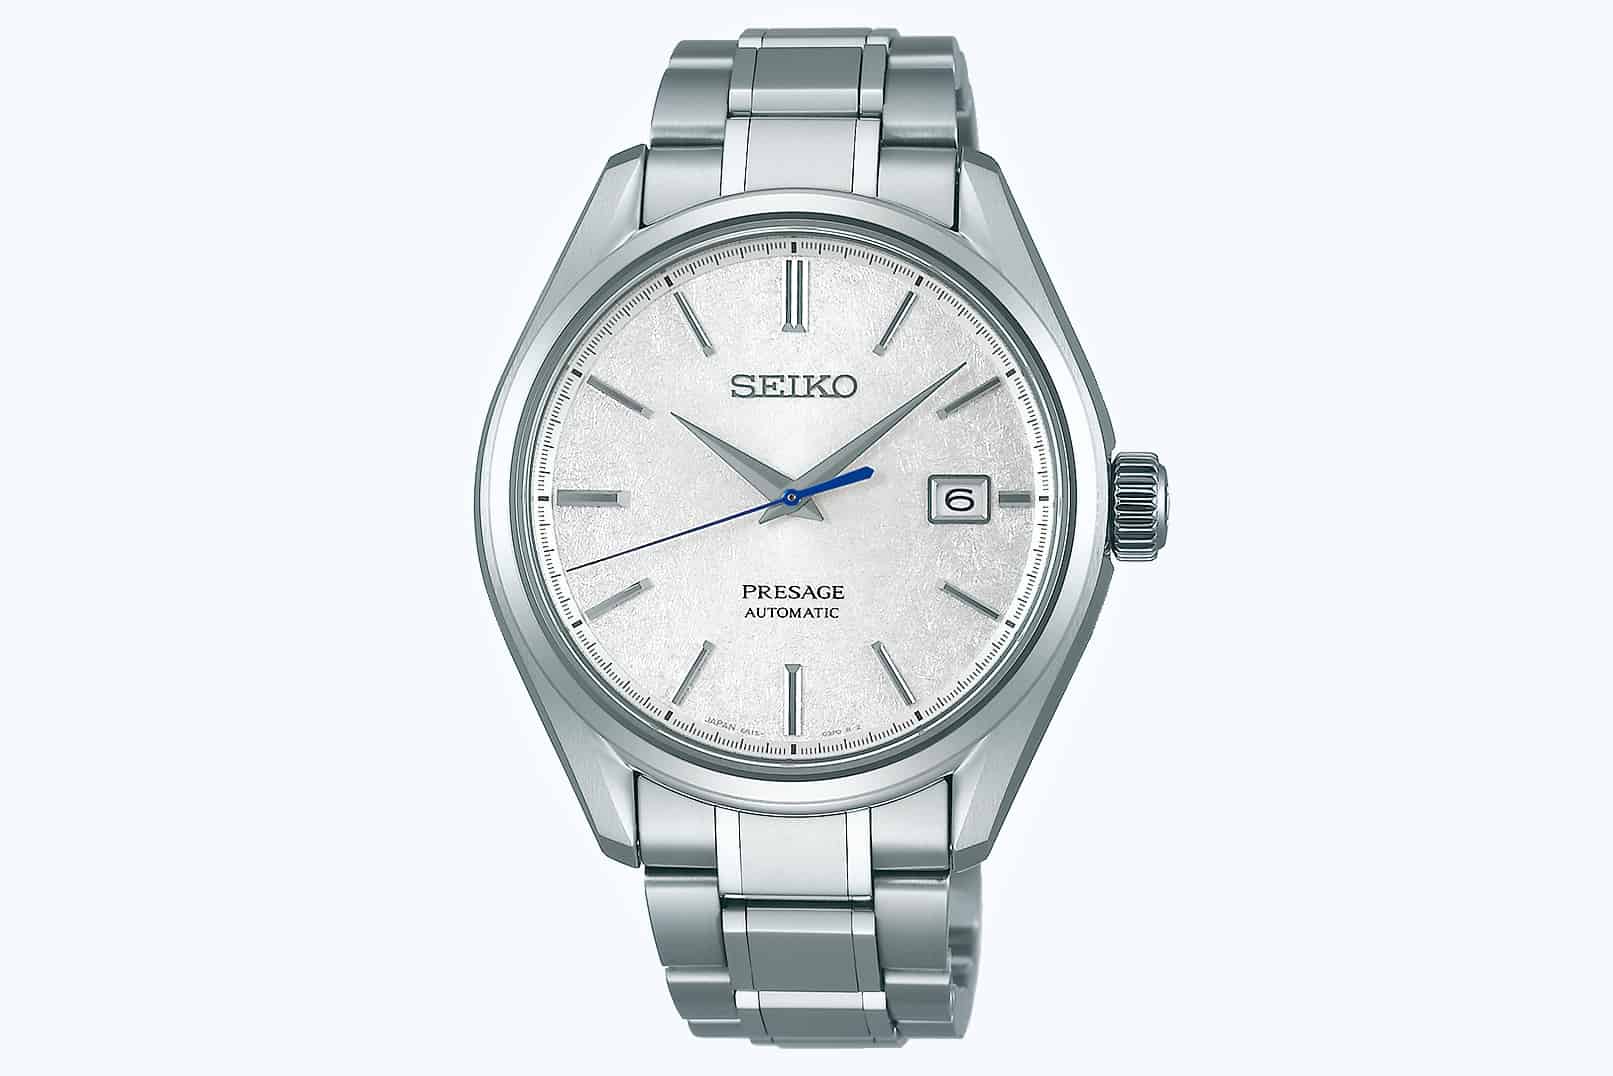 Introducing the Seiko Presage “Baby GS Snowflake” ref. SARX055, a JDM Release With a Nod to Grand Seiko